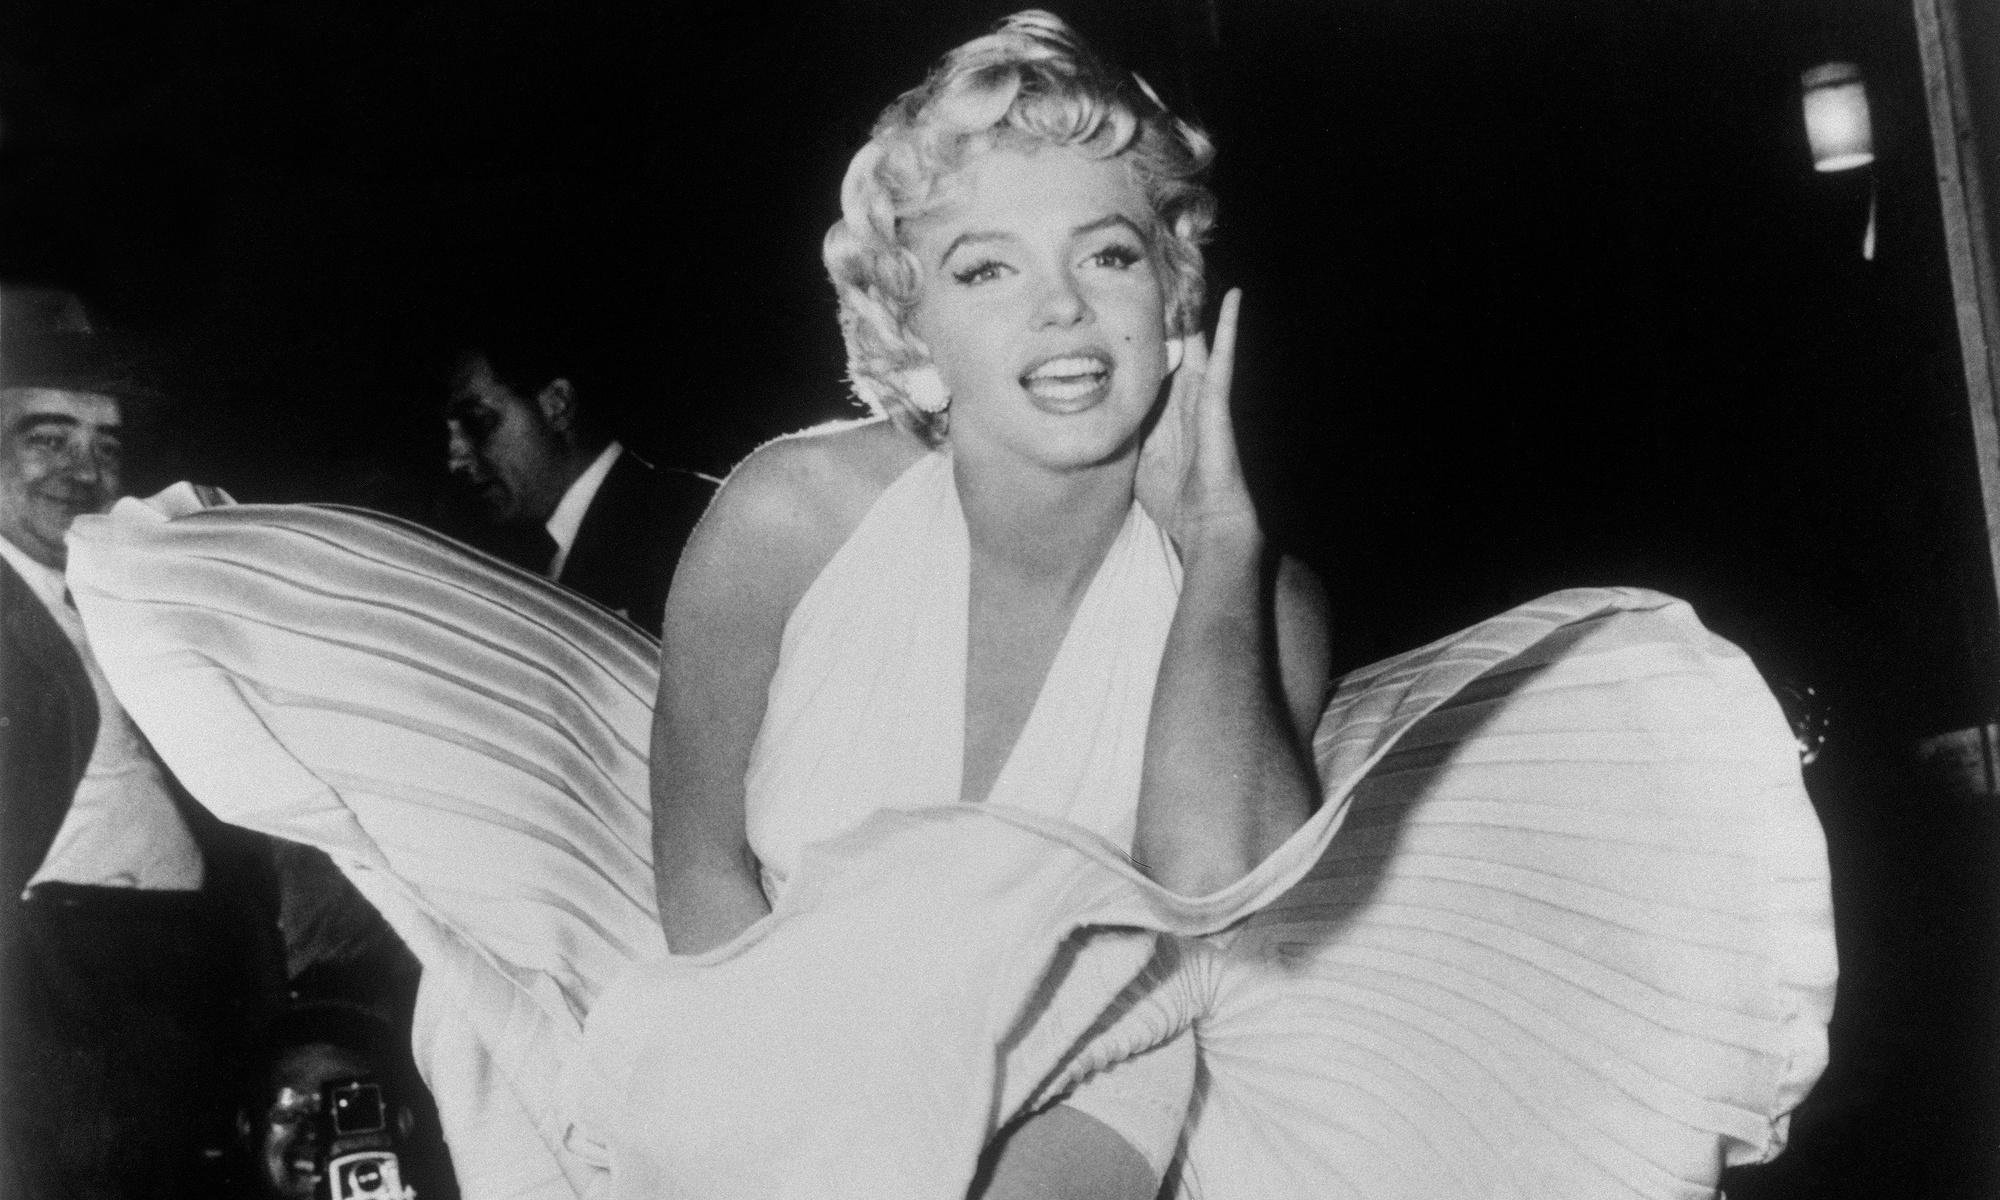 Stuffed into a shoebox, seized by the FBI: the amazing fates of Hollywood’s greatest dresses